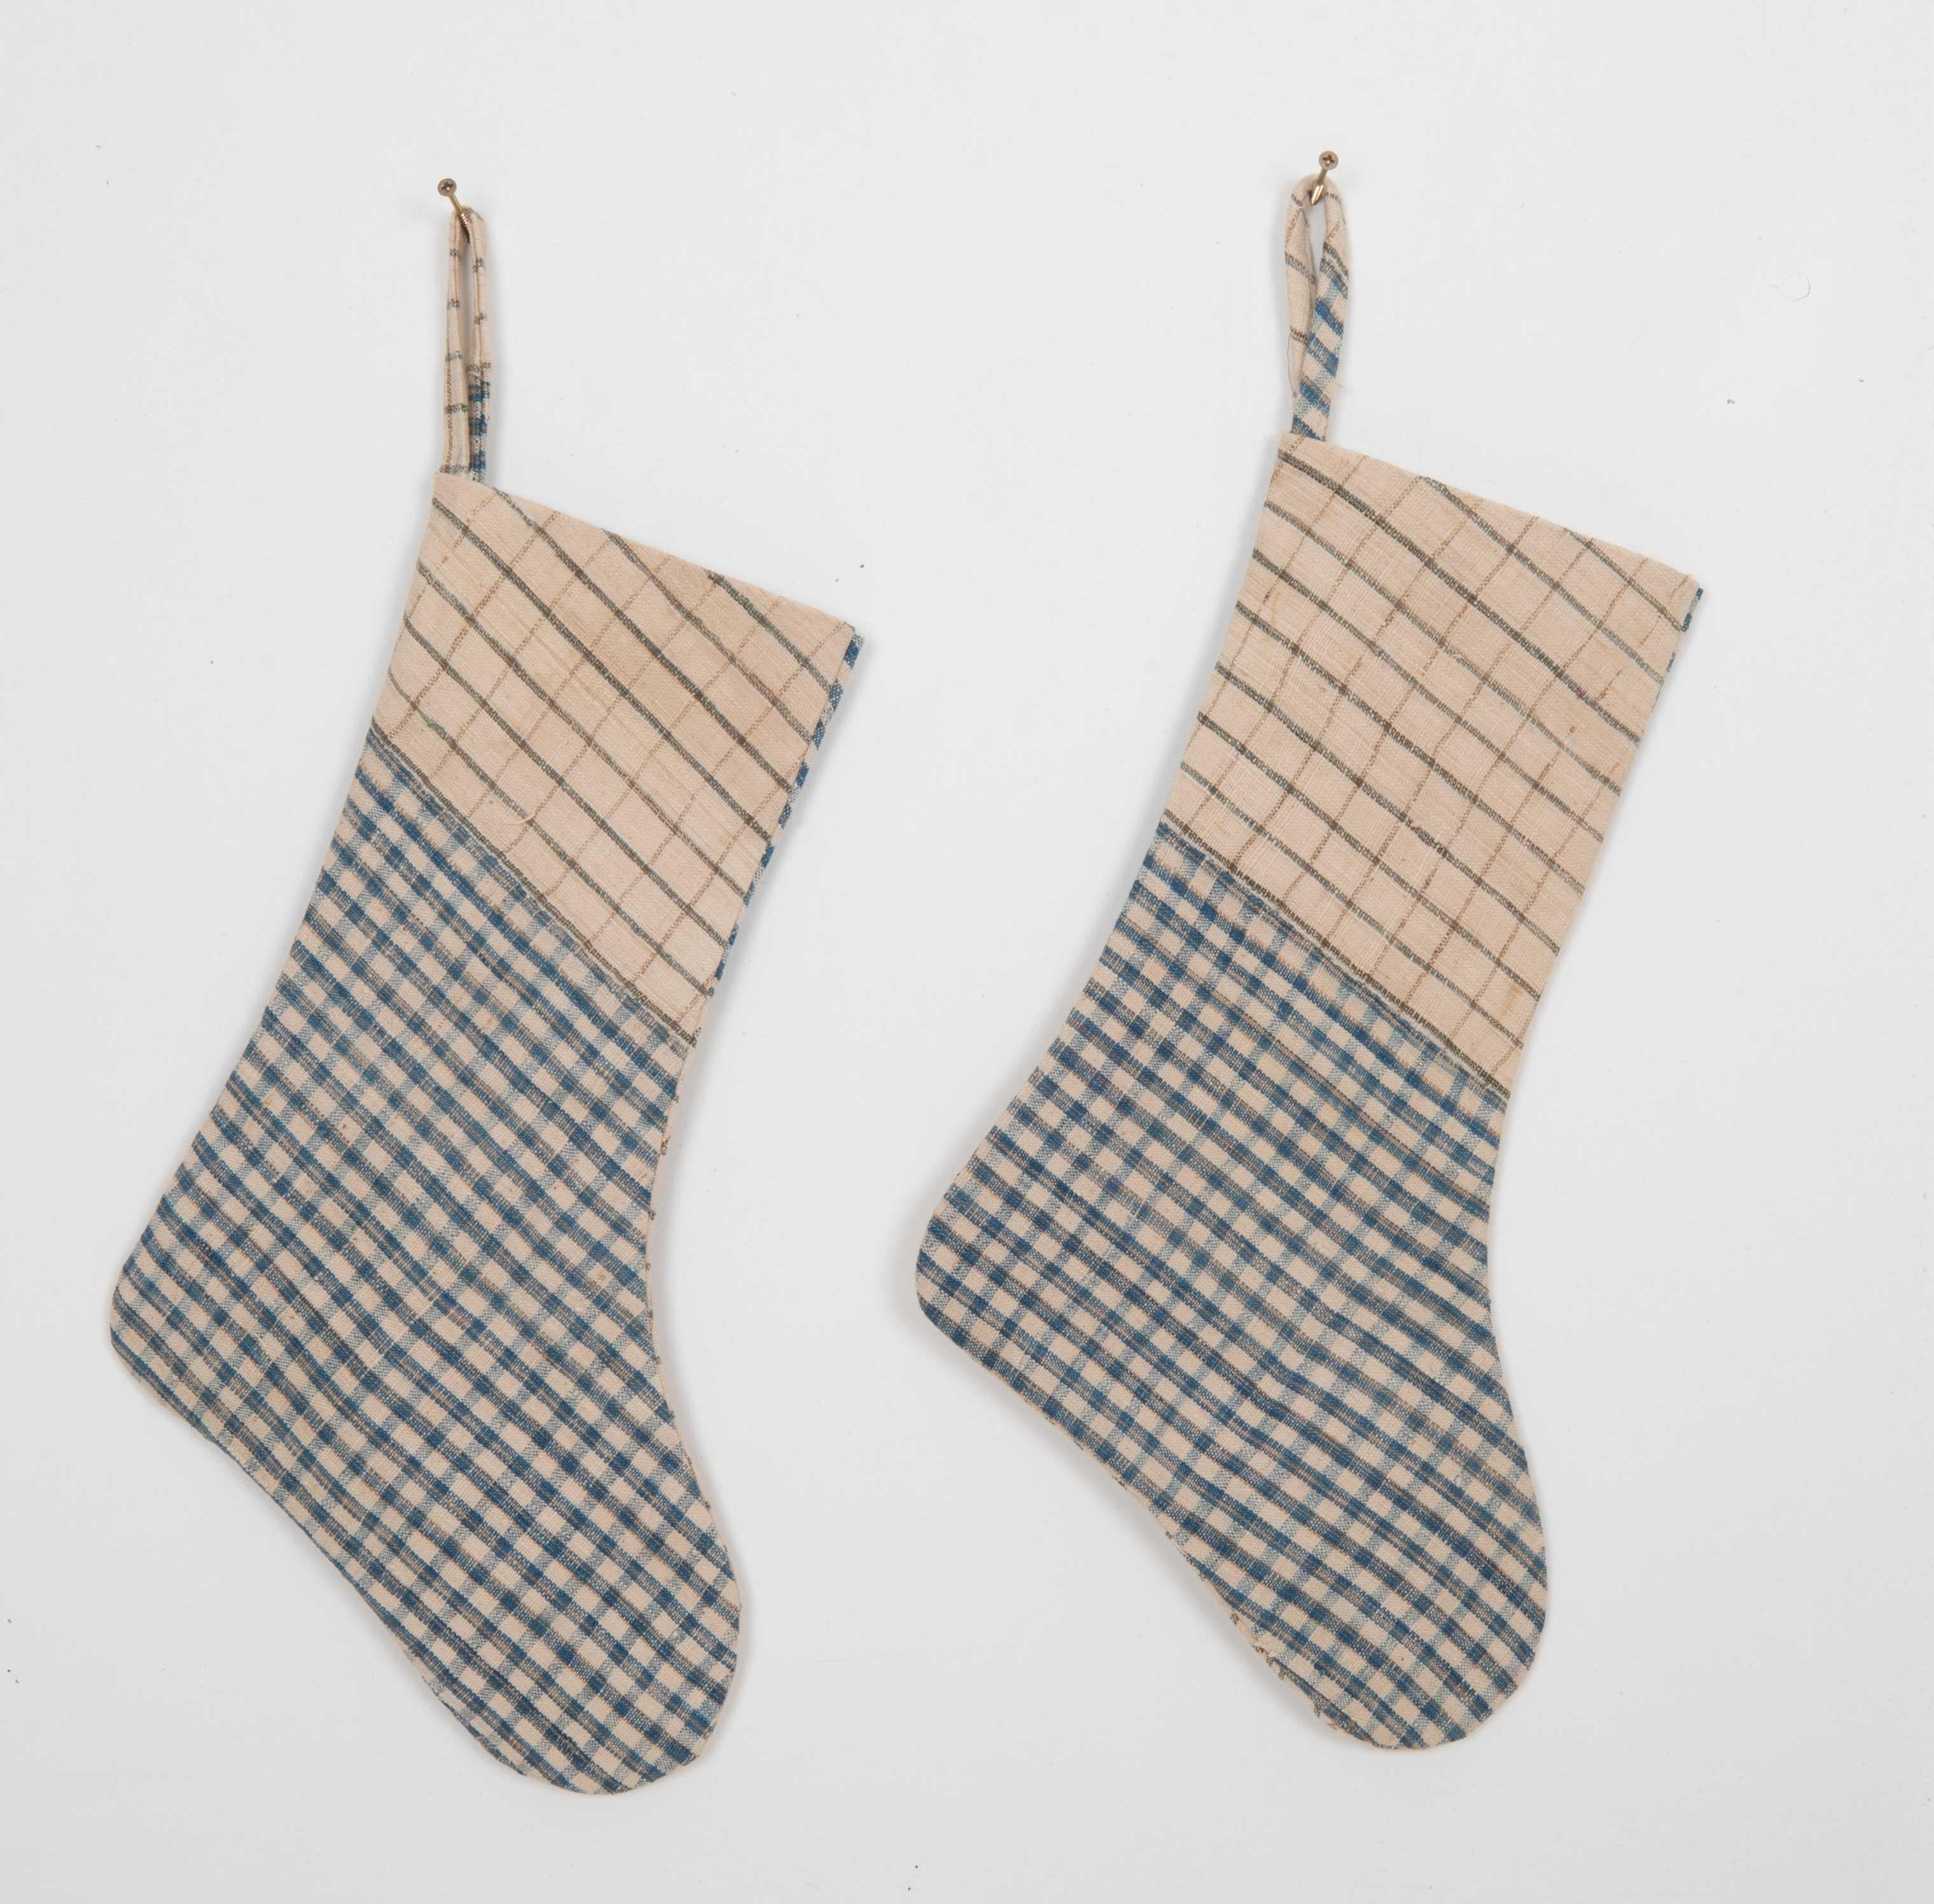 These Christmas Stockings were made from mid 20th C. AnatoliantextileFragments.


Please note, this stocking was made from textile fragments.
